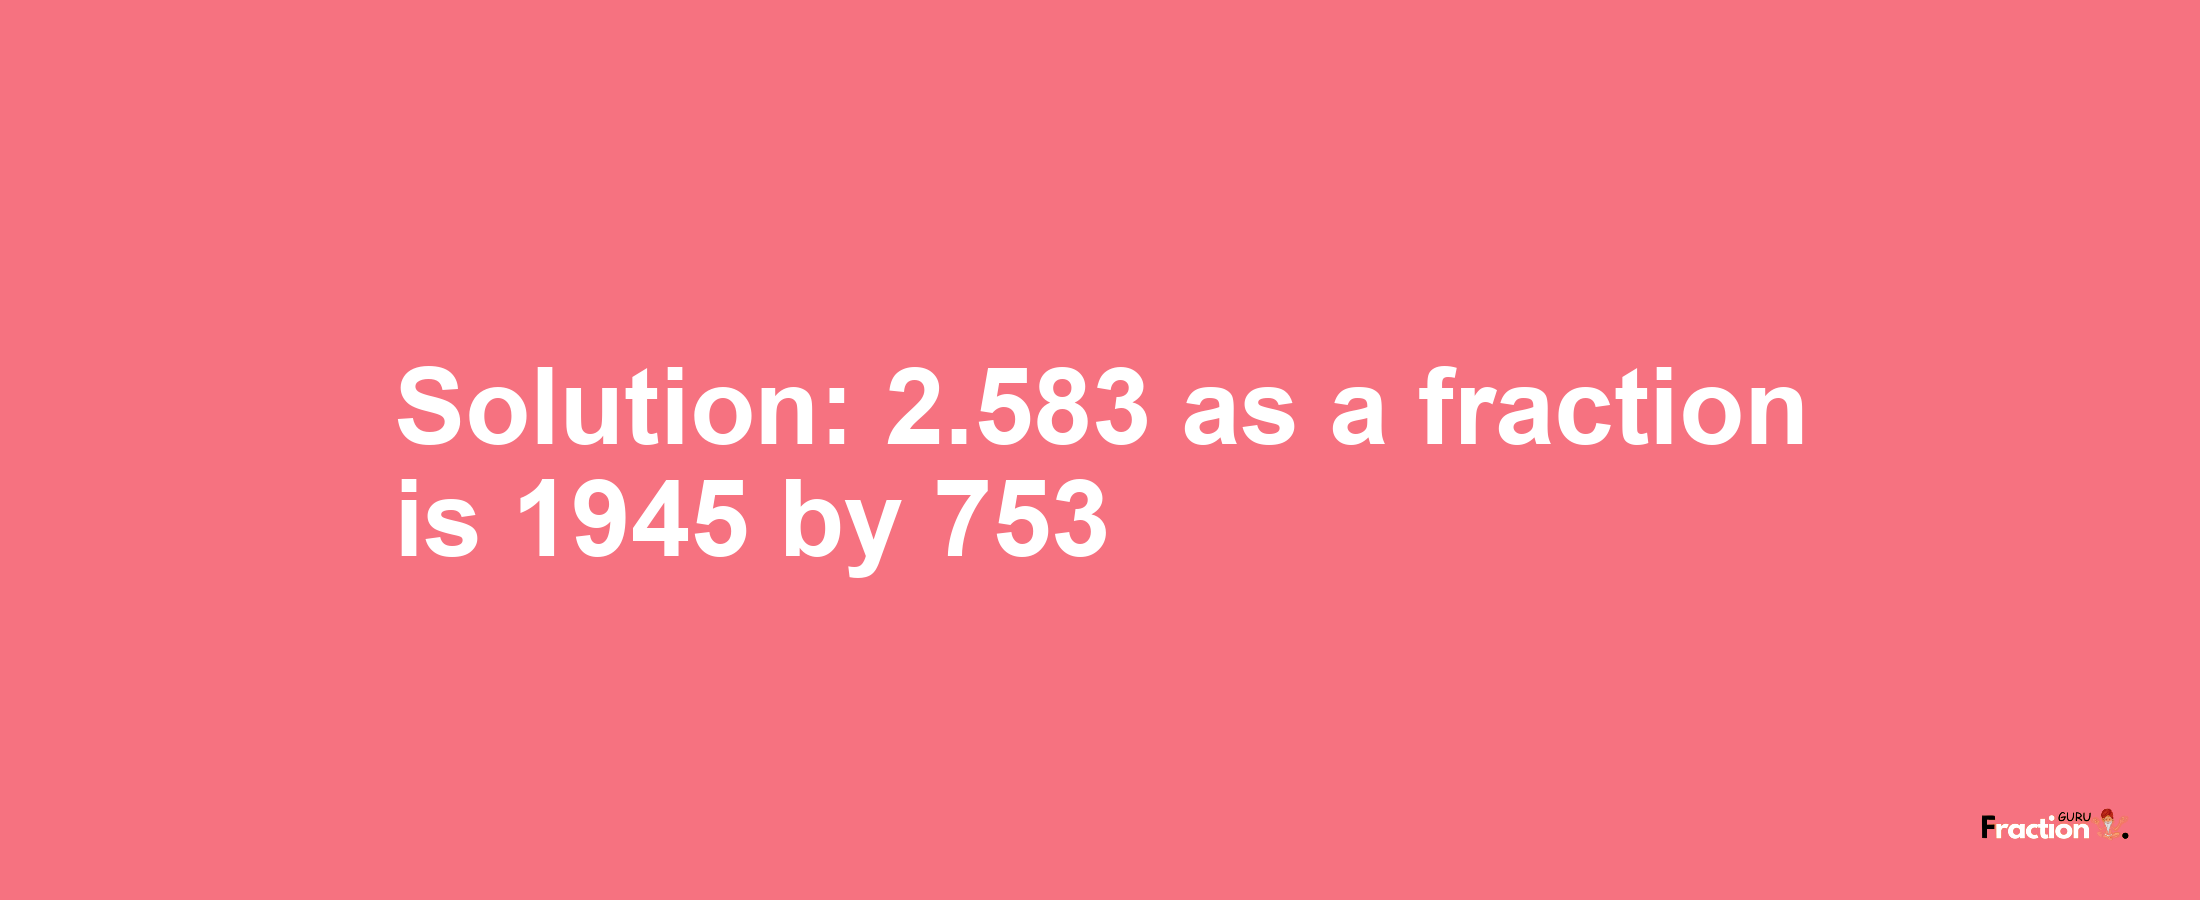 Solution:2.583 as a fraction is 1945/753